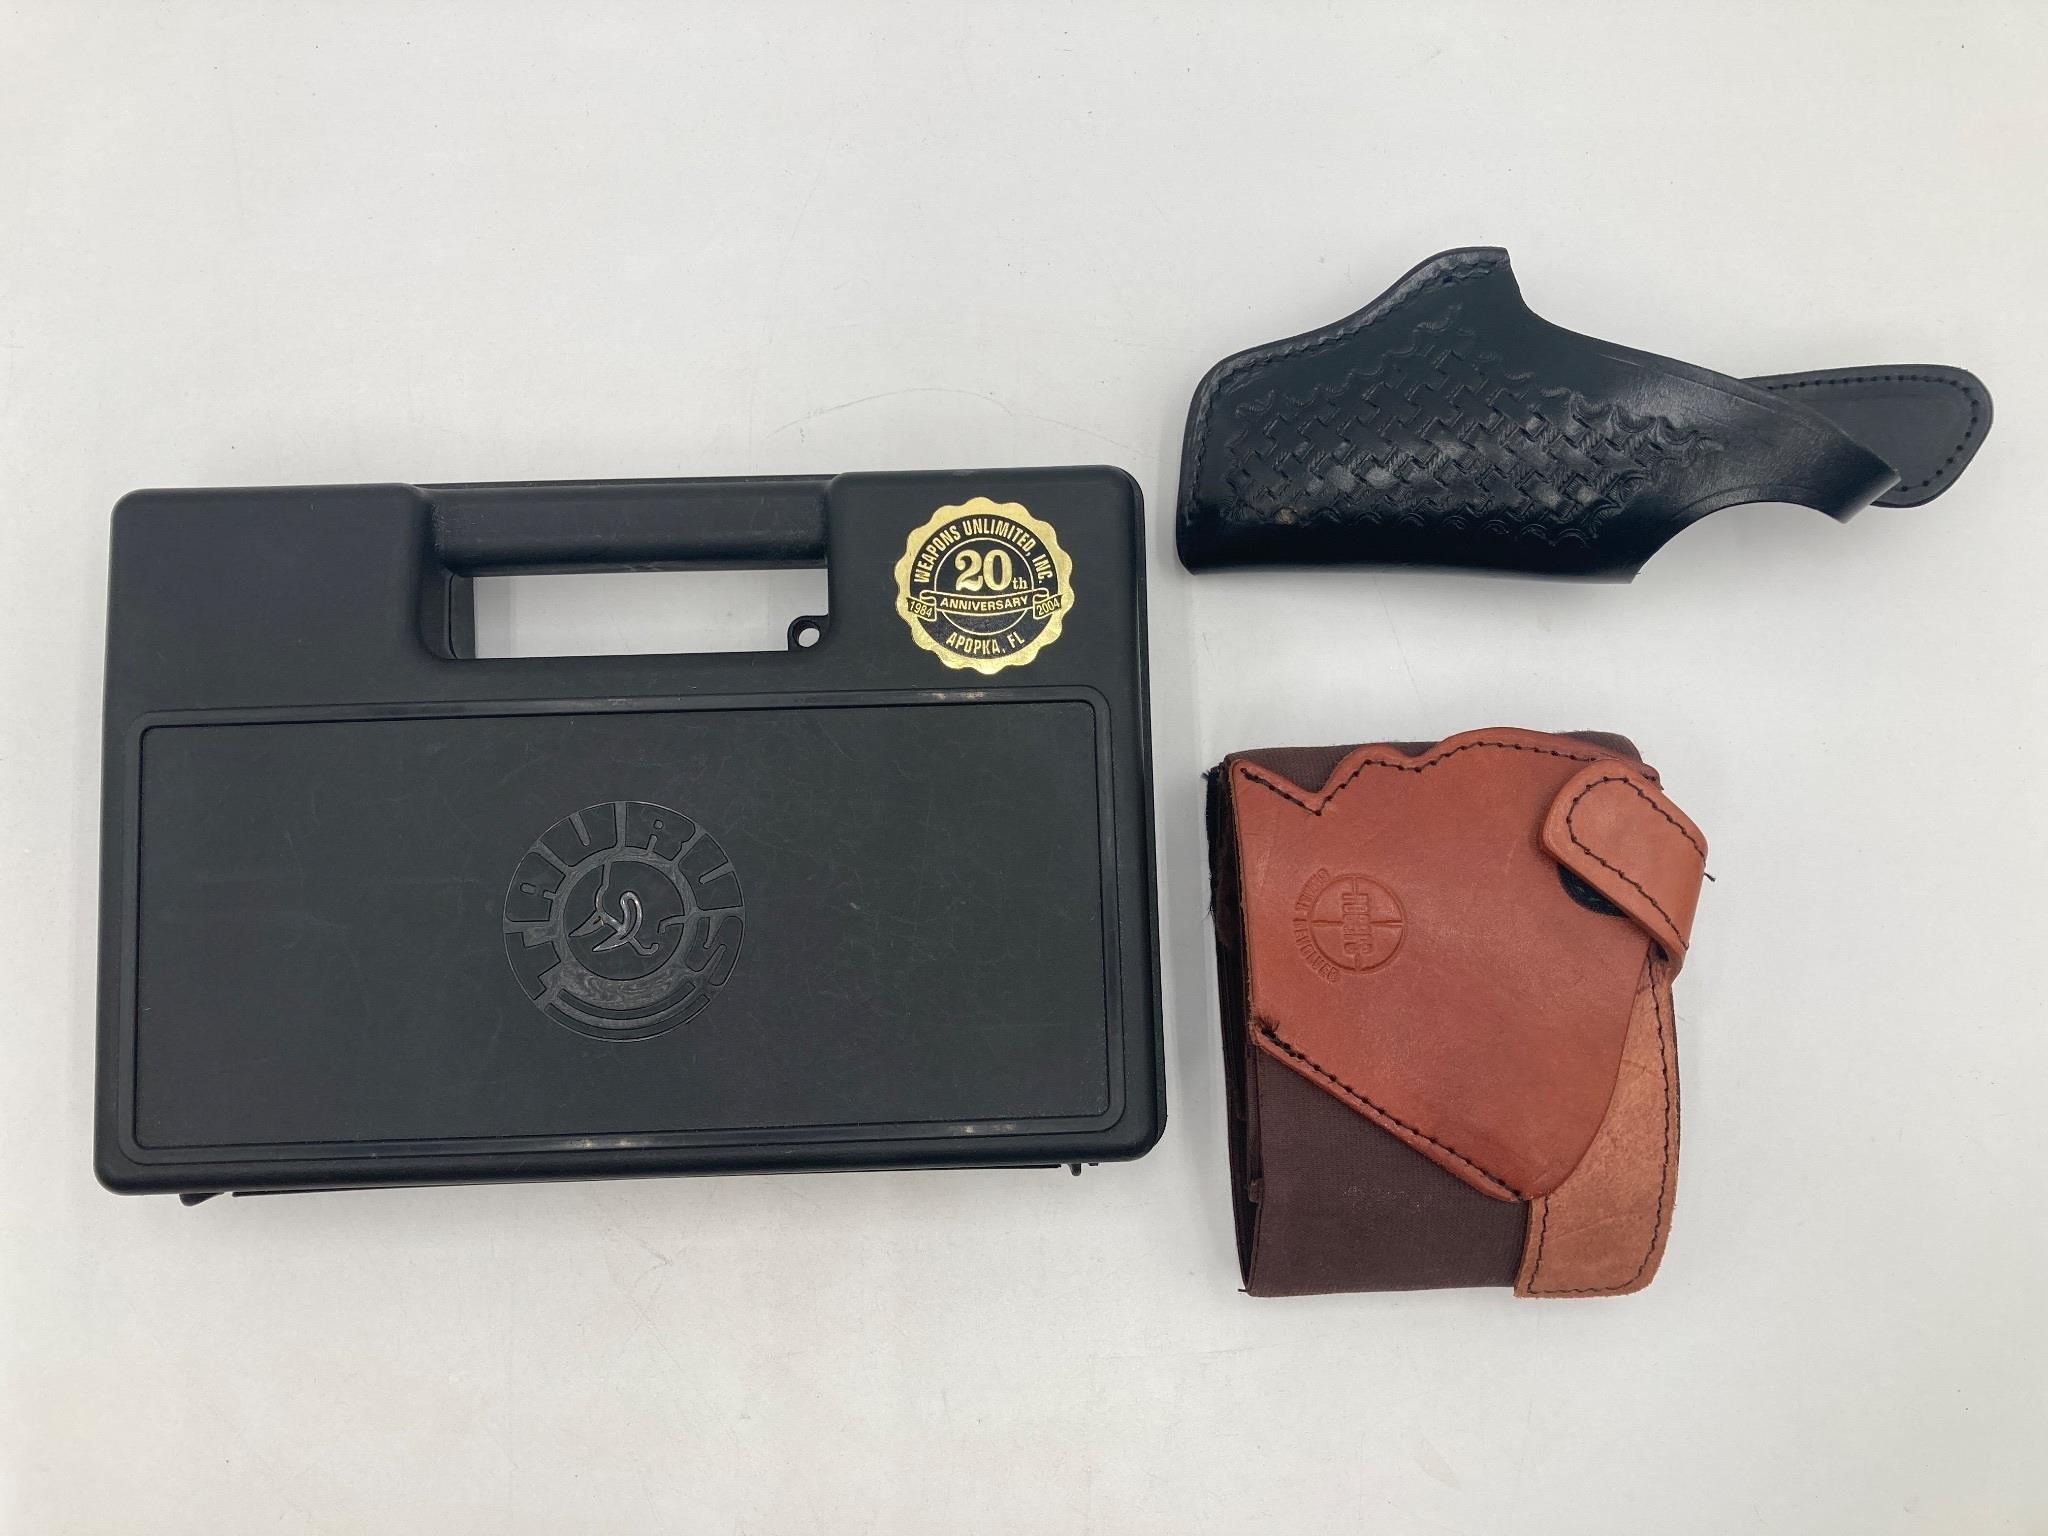 Pistol Storage Case & Leather Holsters